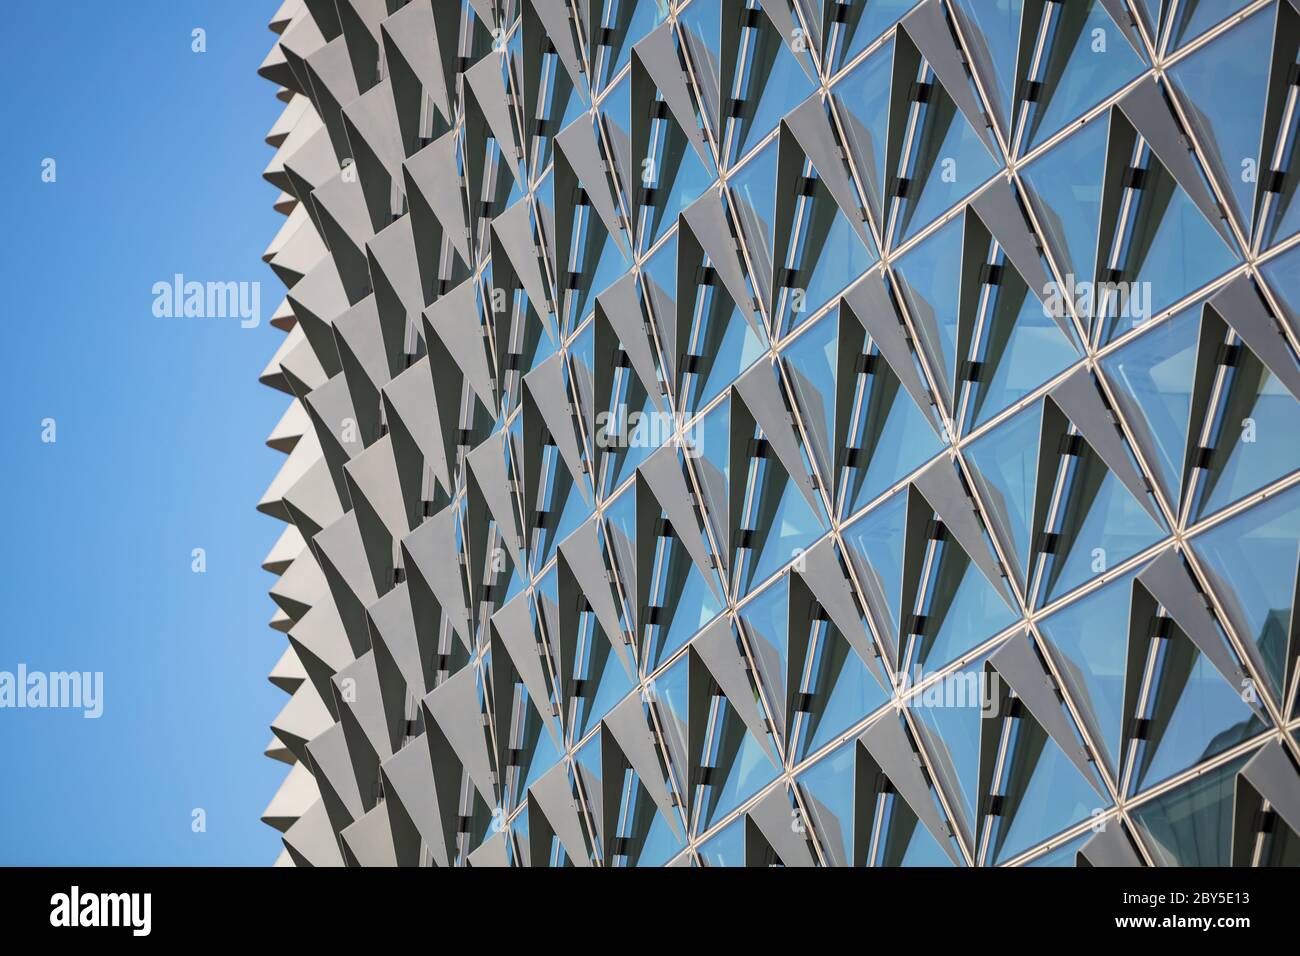 Adelaide South Australia November 18th 2019 : Looking up at the architectural details of the SAHMRI building, a medical research facility in Adelaide, Stock Photo